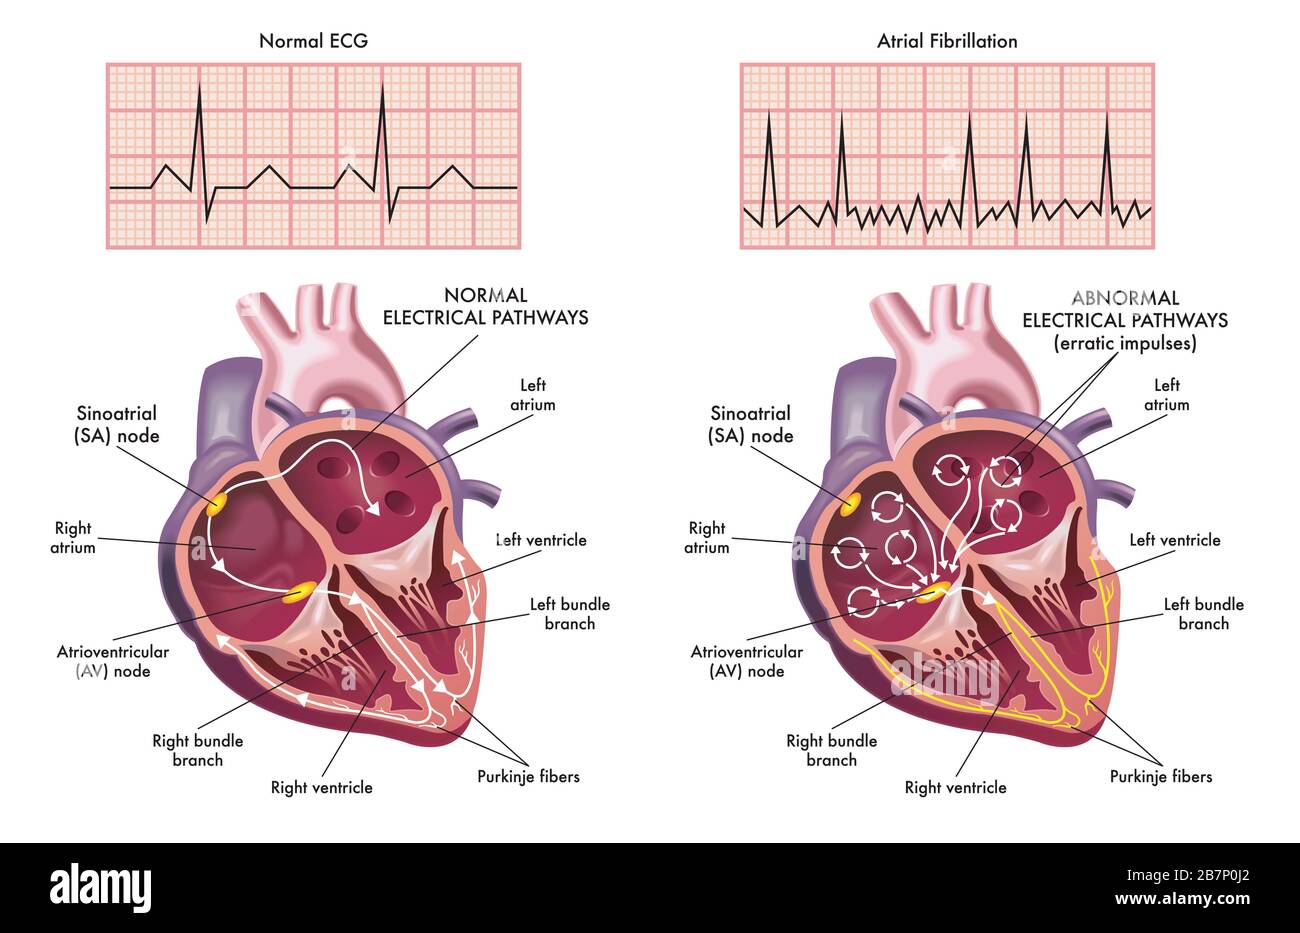 Medical illustration showing the symptoms of a heart with atrial fibrillation compared to normal one. Stock Photo